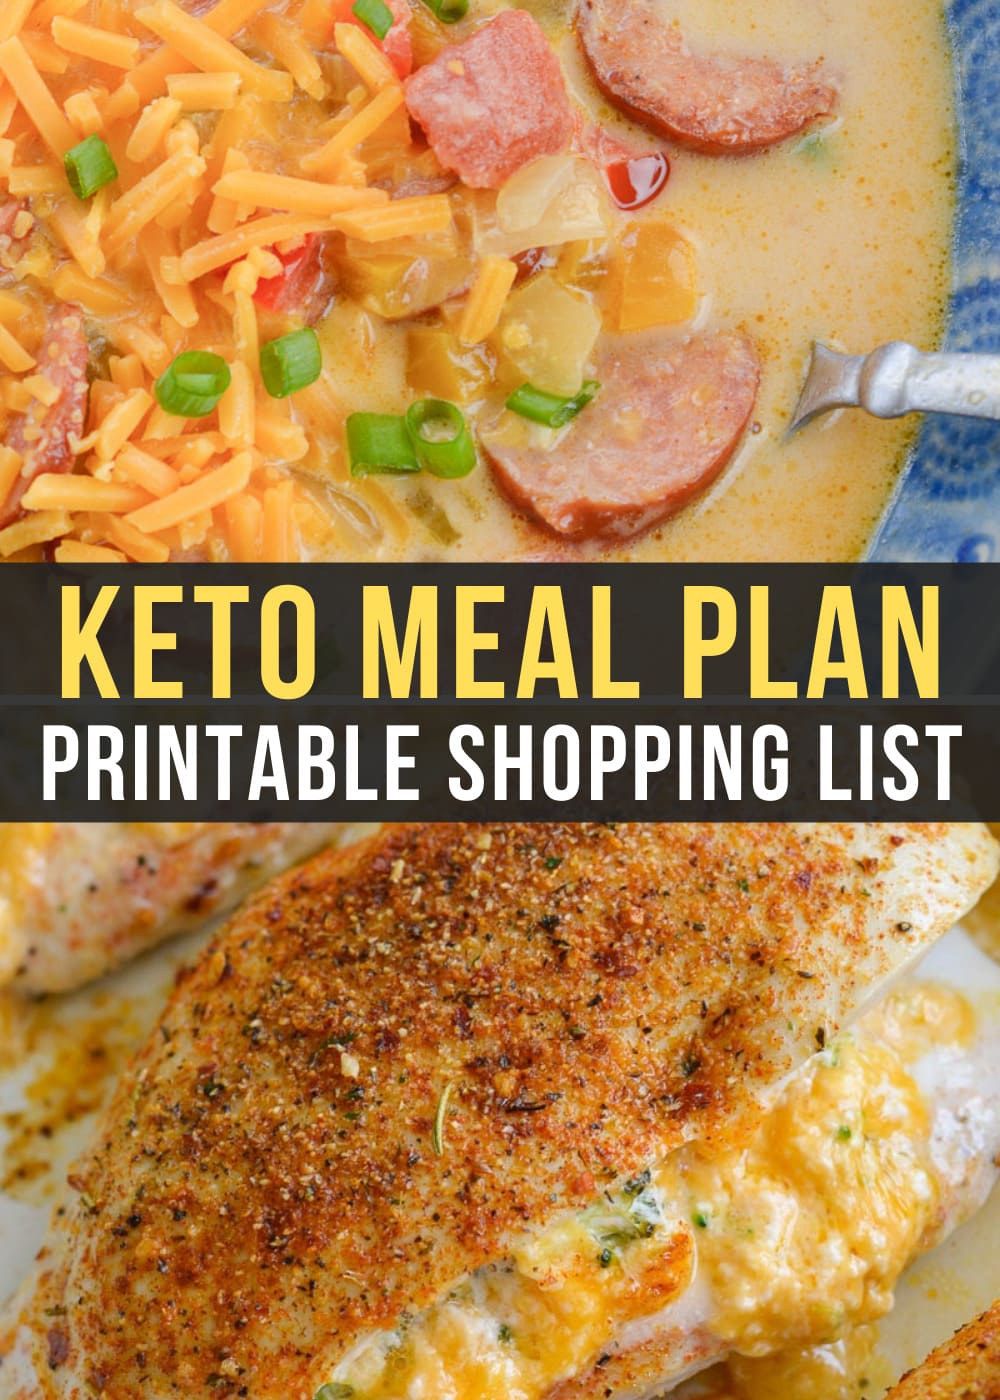 This Easy Keto Meal Plan includes delicious low-carb dinners like Cheesy Smoked Sausage Soup and Broccoli Cheddar Stuffed Chicken!